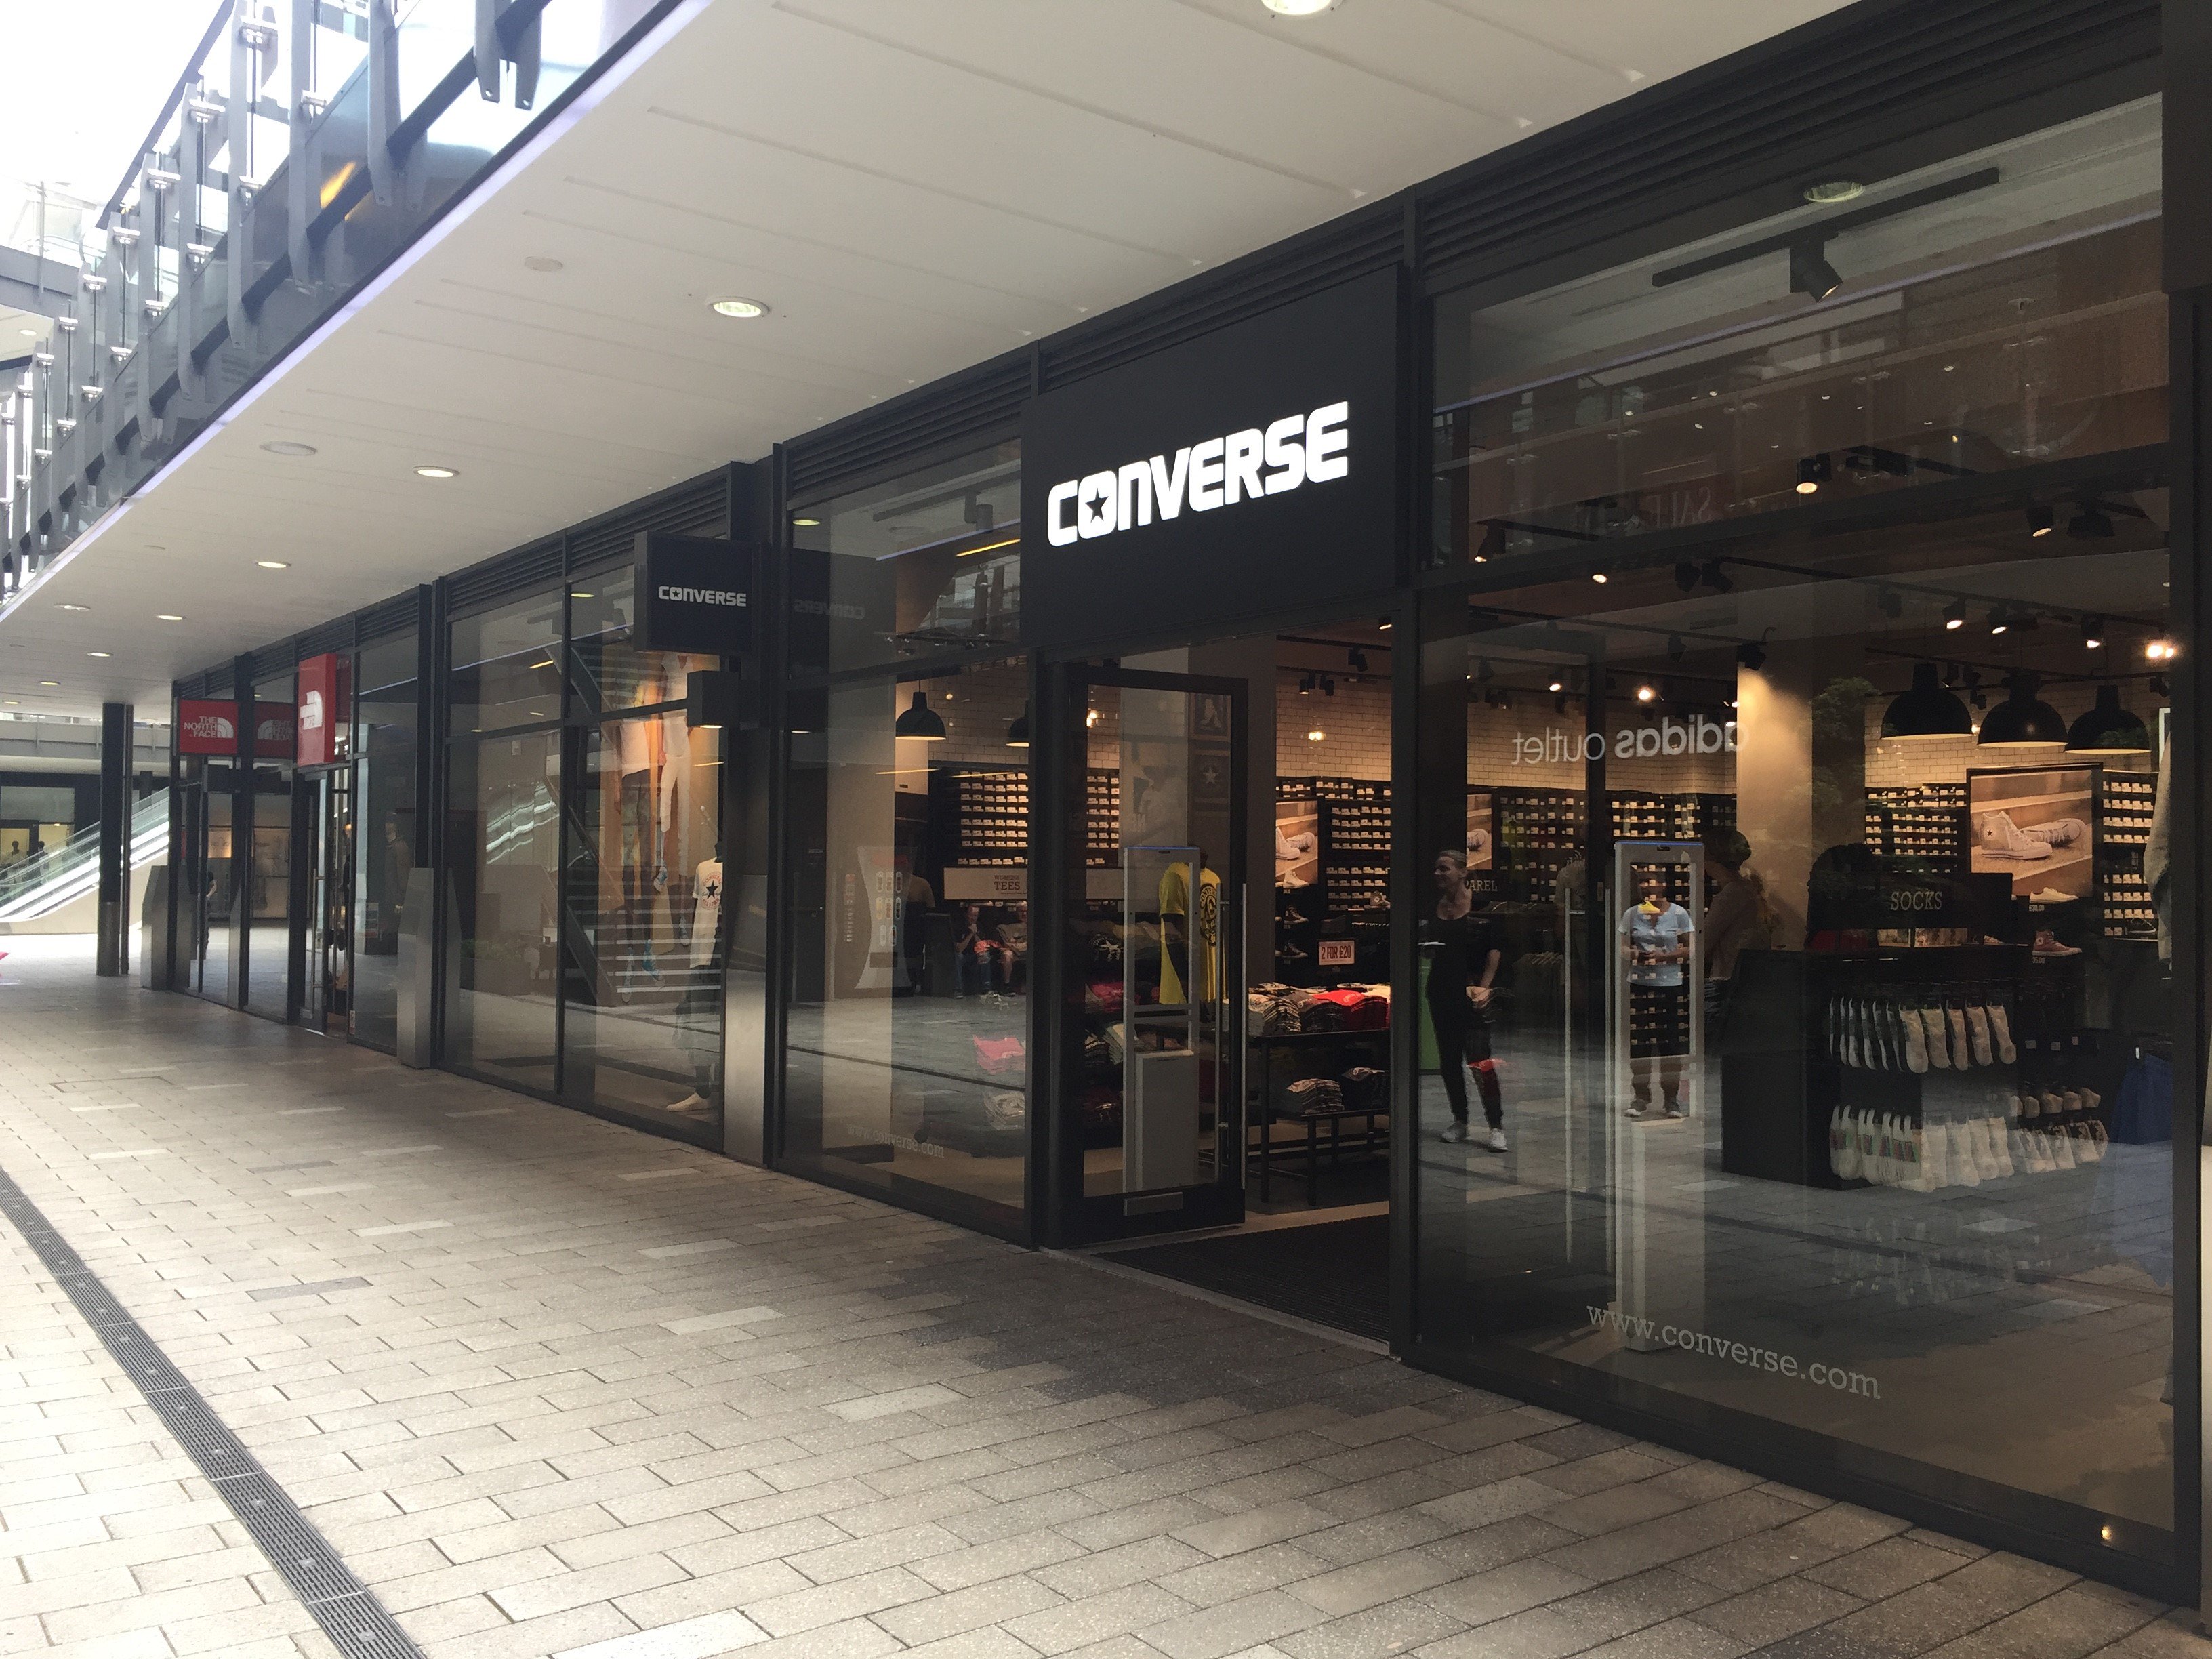 Inconsciente Serpiente Mezquita Twitter-এ London Designer Outlet: "Our @Converse store is now open! Hurry  on down - your future pair of Converse is eagerly awaiting you to buy them!  https://t.co/IEsKqlTllv" / টুইটার